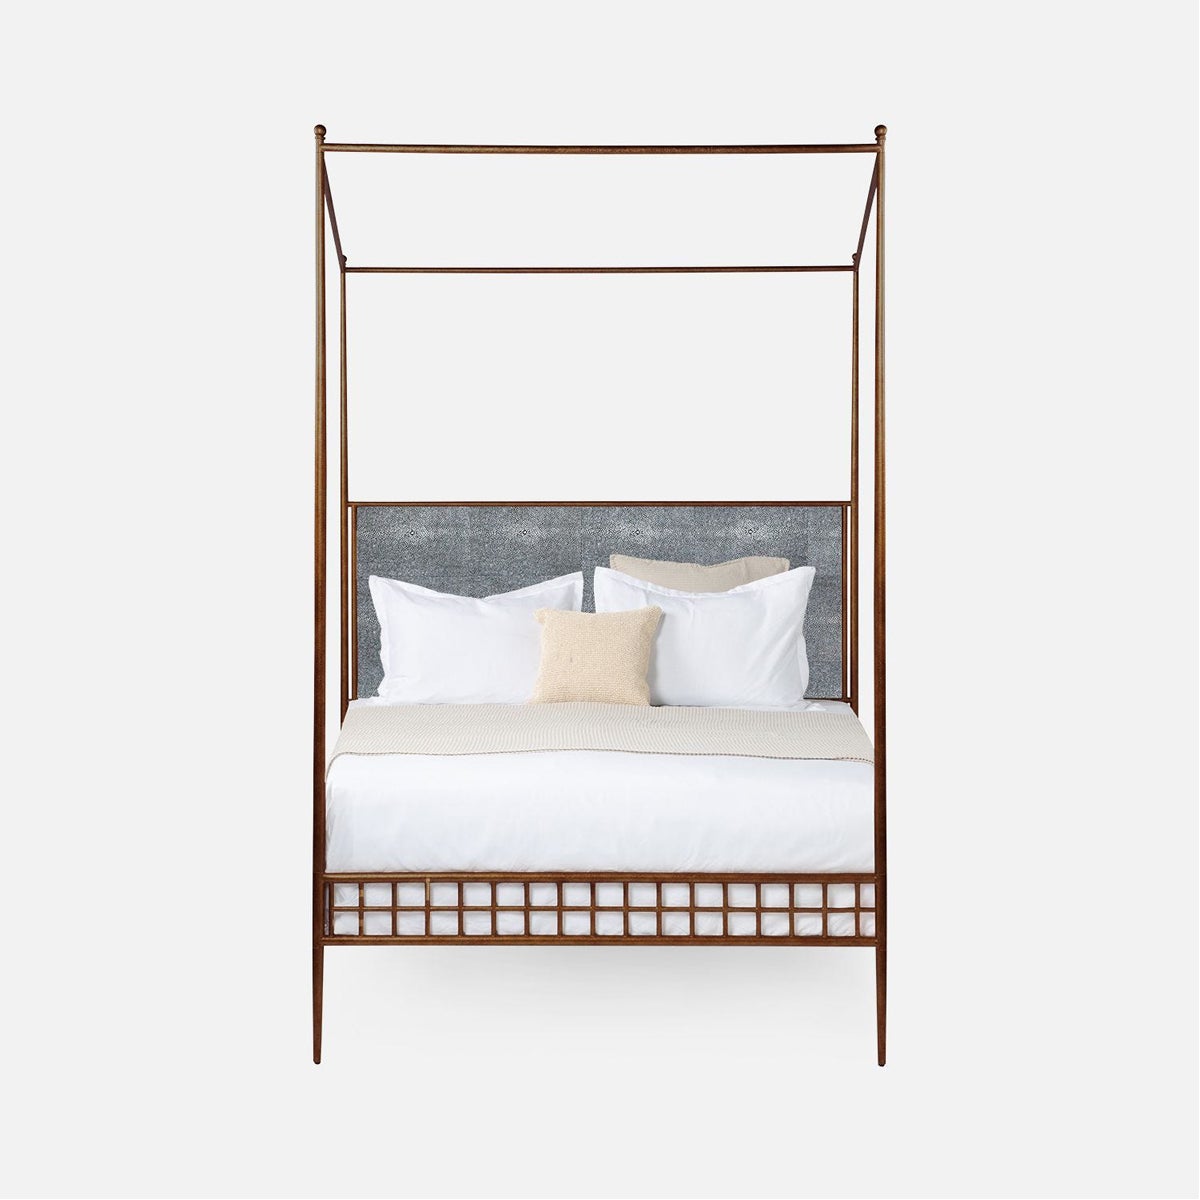 Made Goods Hamilton Textured Iron Canopy Bed in Volta Fabric